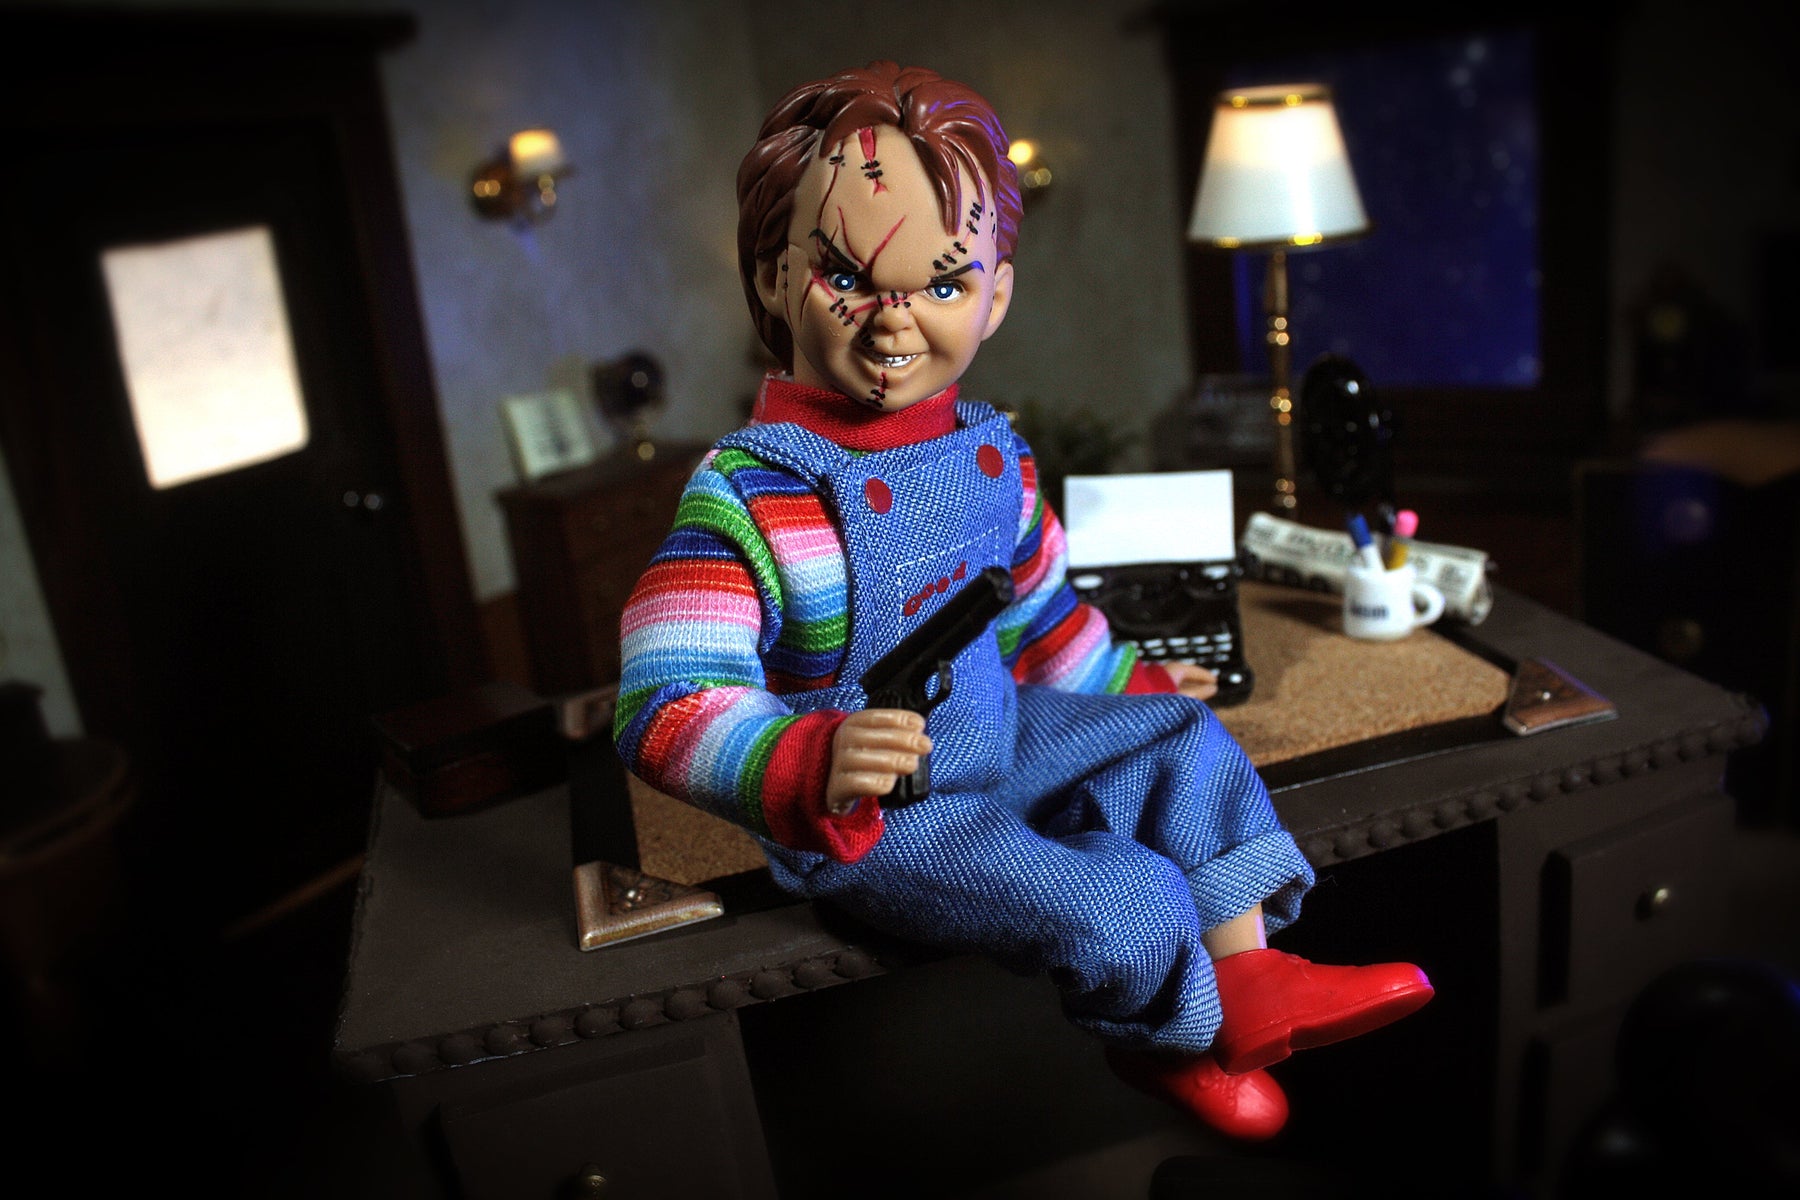 Damaged Package Mego Horror Wave 14 - Chucky 8" Action Figure